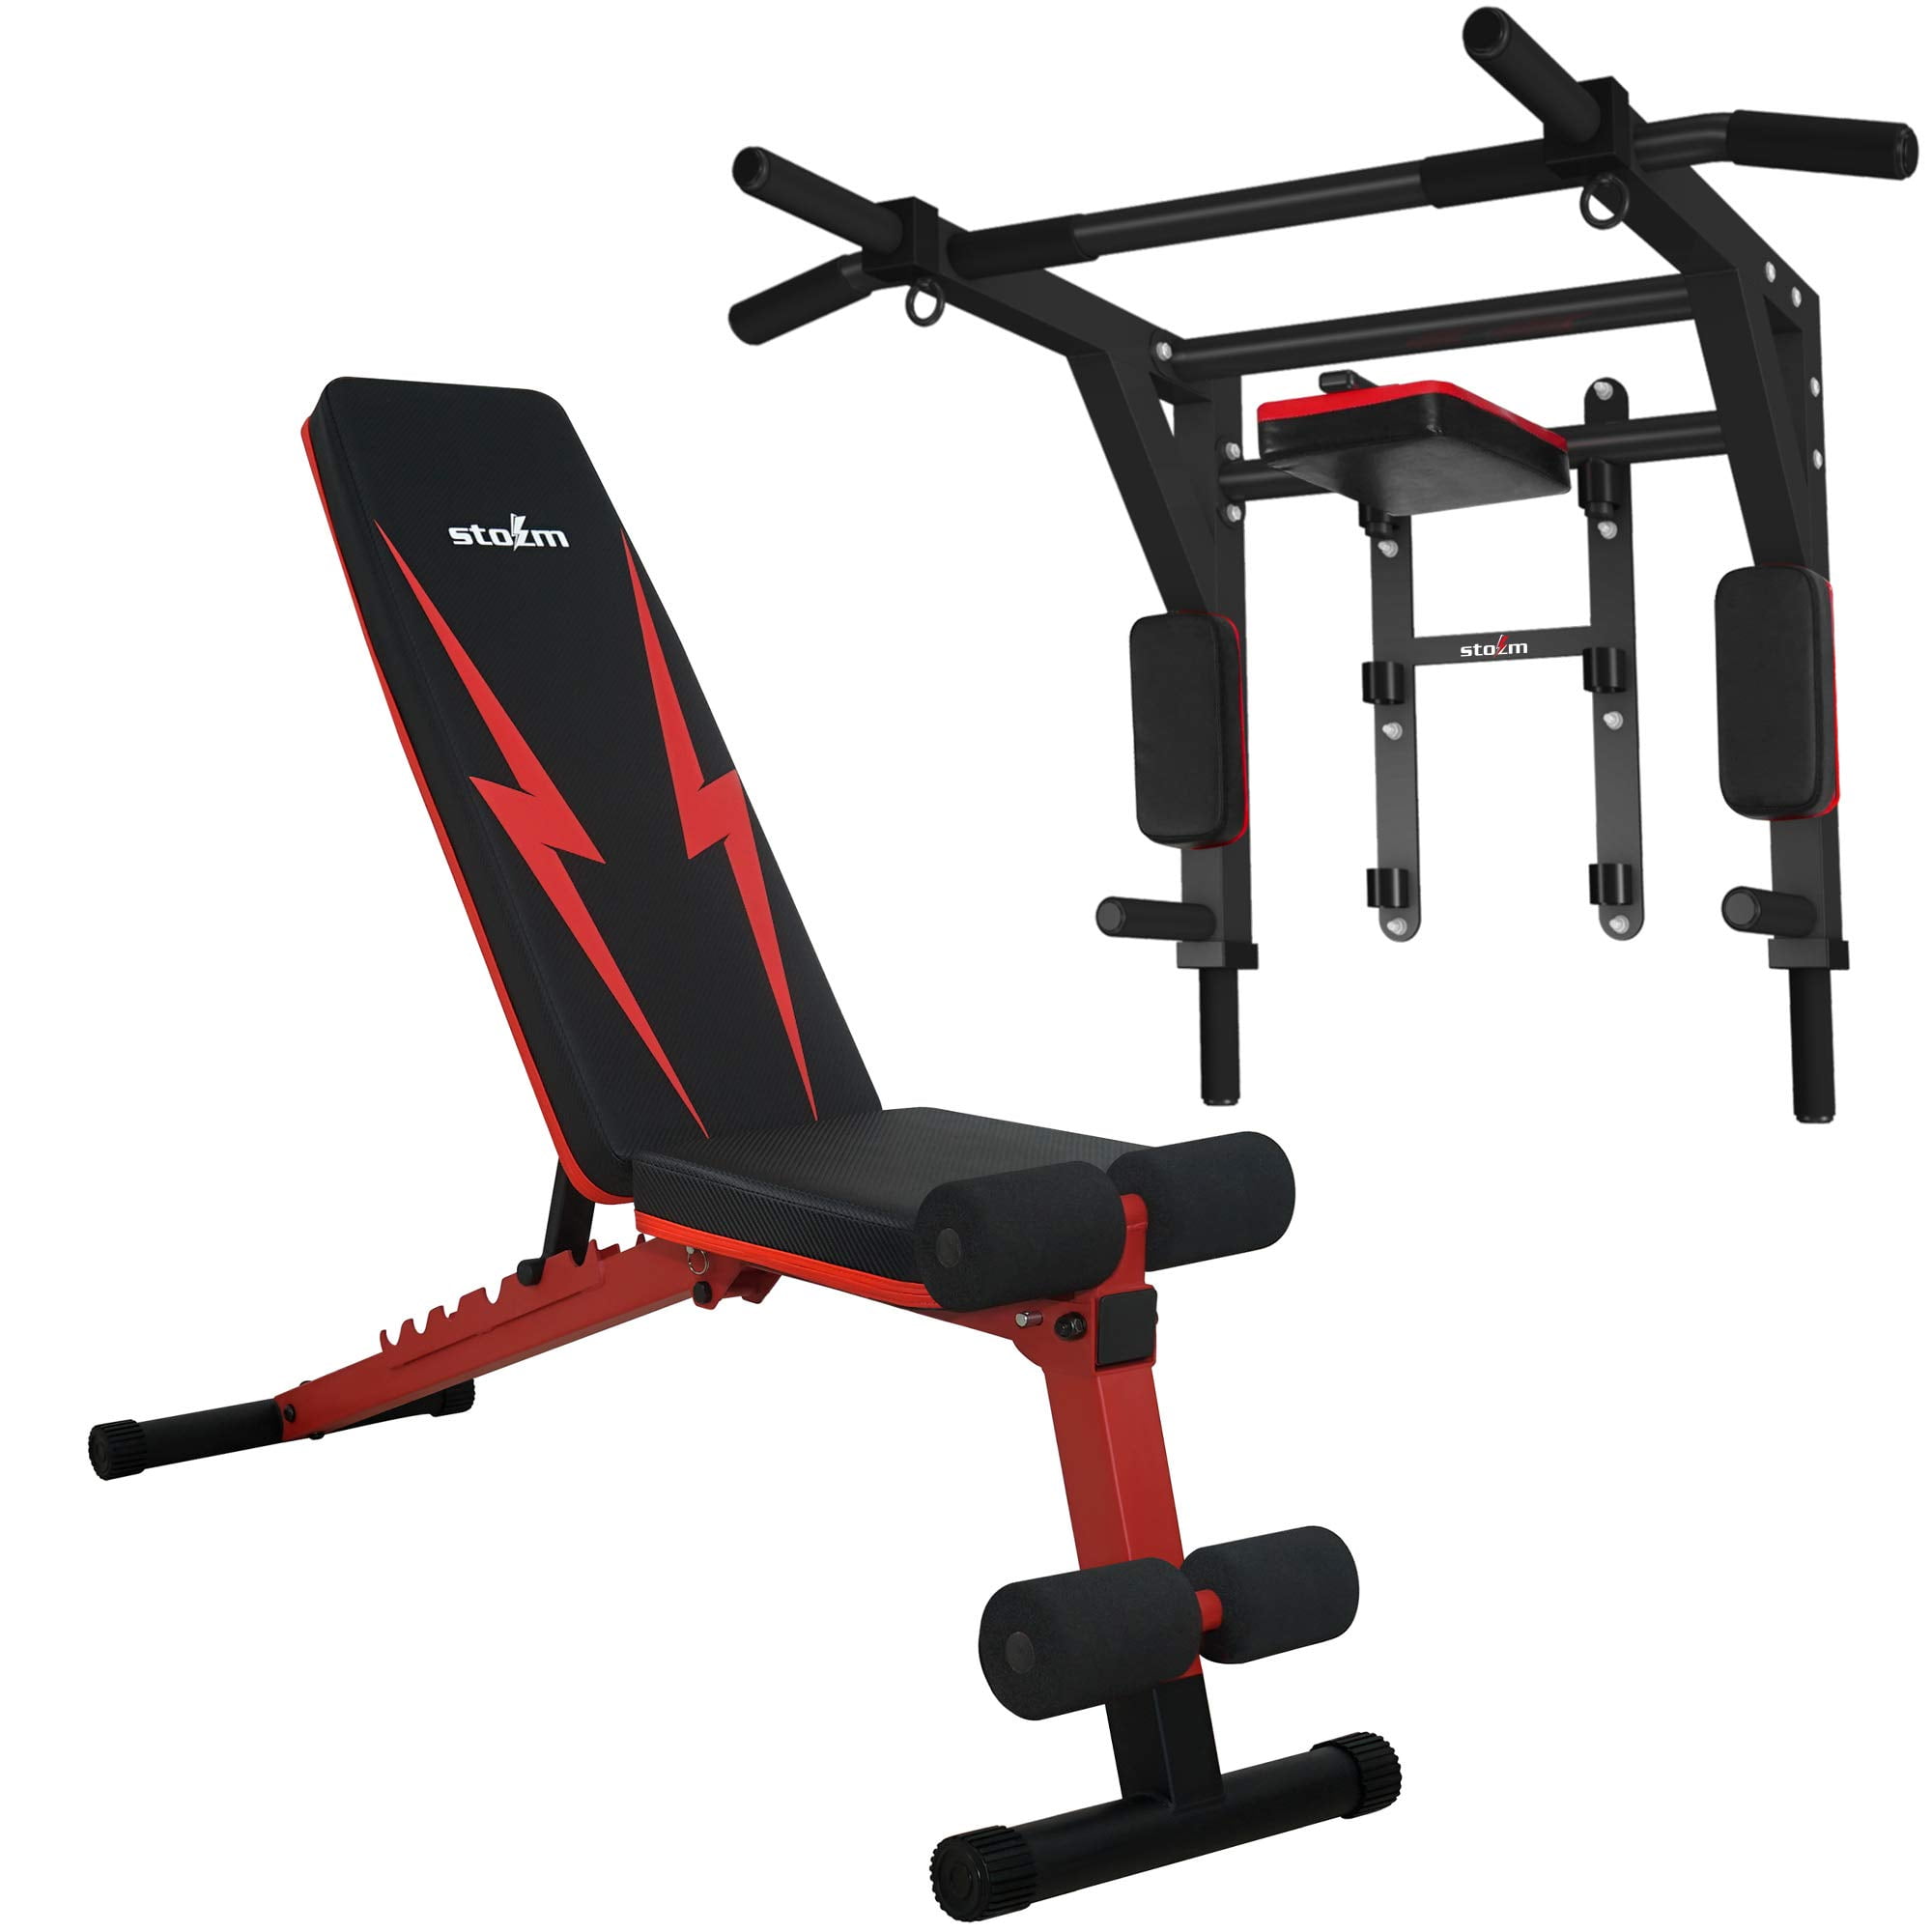 STOZM Combo of Deluxe Pull Up Bar (Black) & Deluxe Adjustable Weight Bench - Multiple Color Options (Amber) Walmart.com